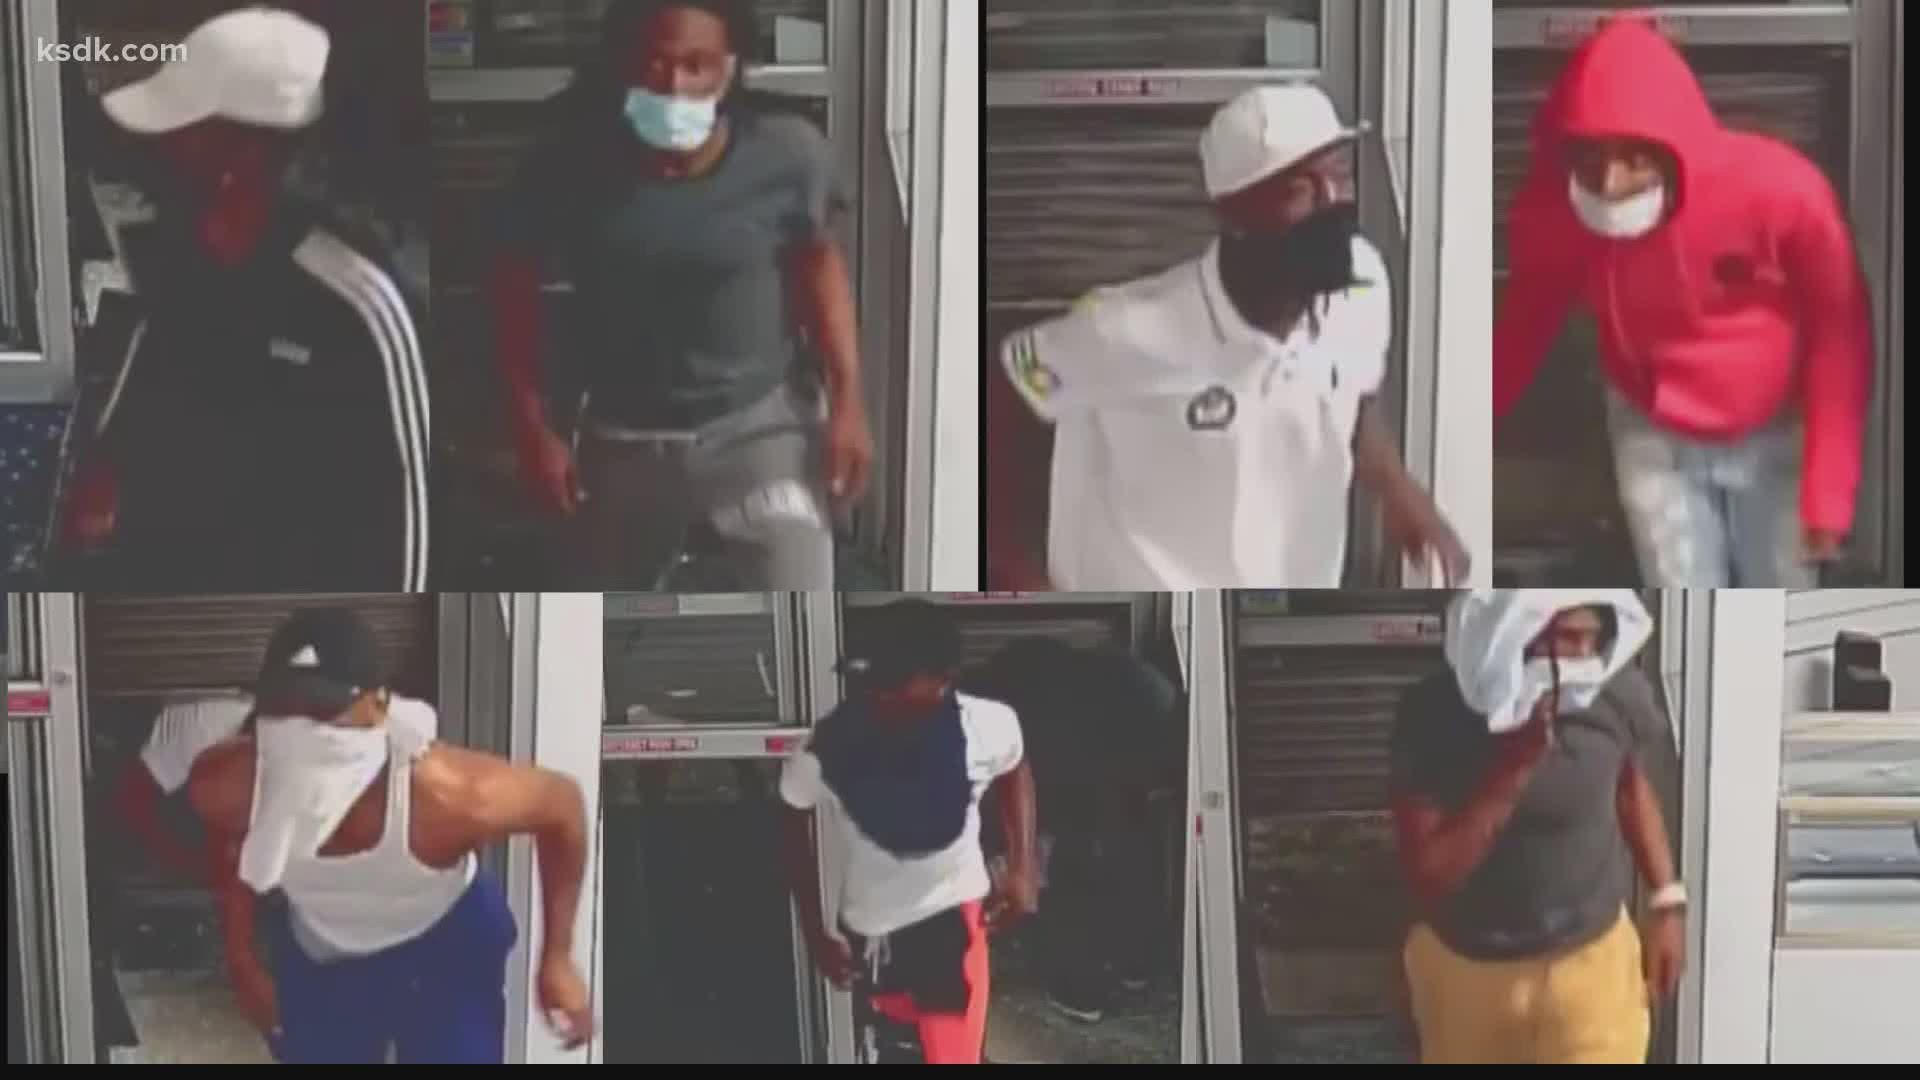 The Pawn Shop Dorn was guarding was looted on Tuesday. Police have released new video footage of the men who broke in.